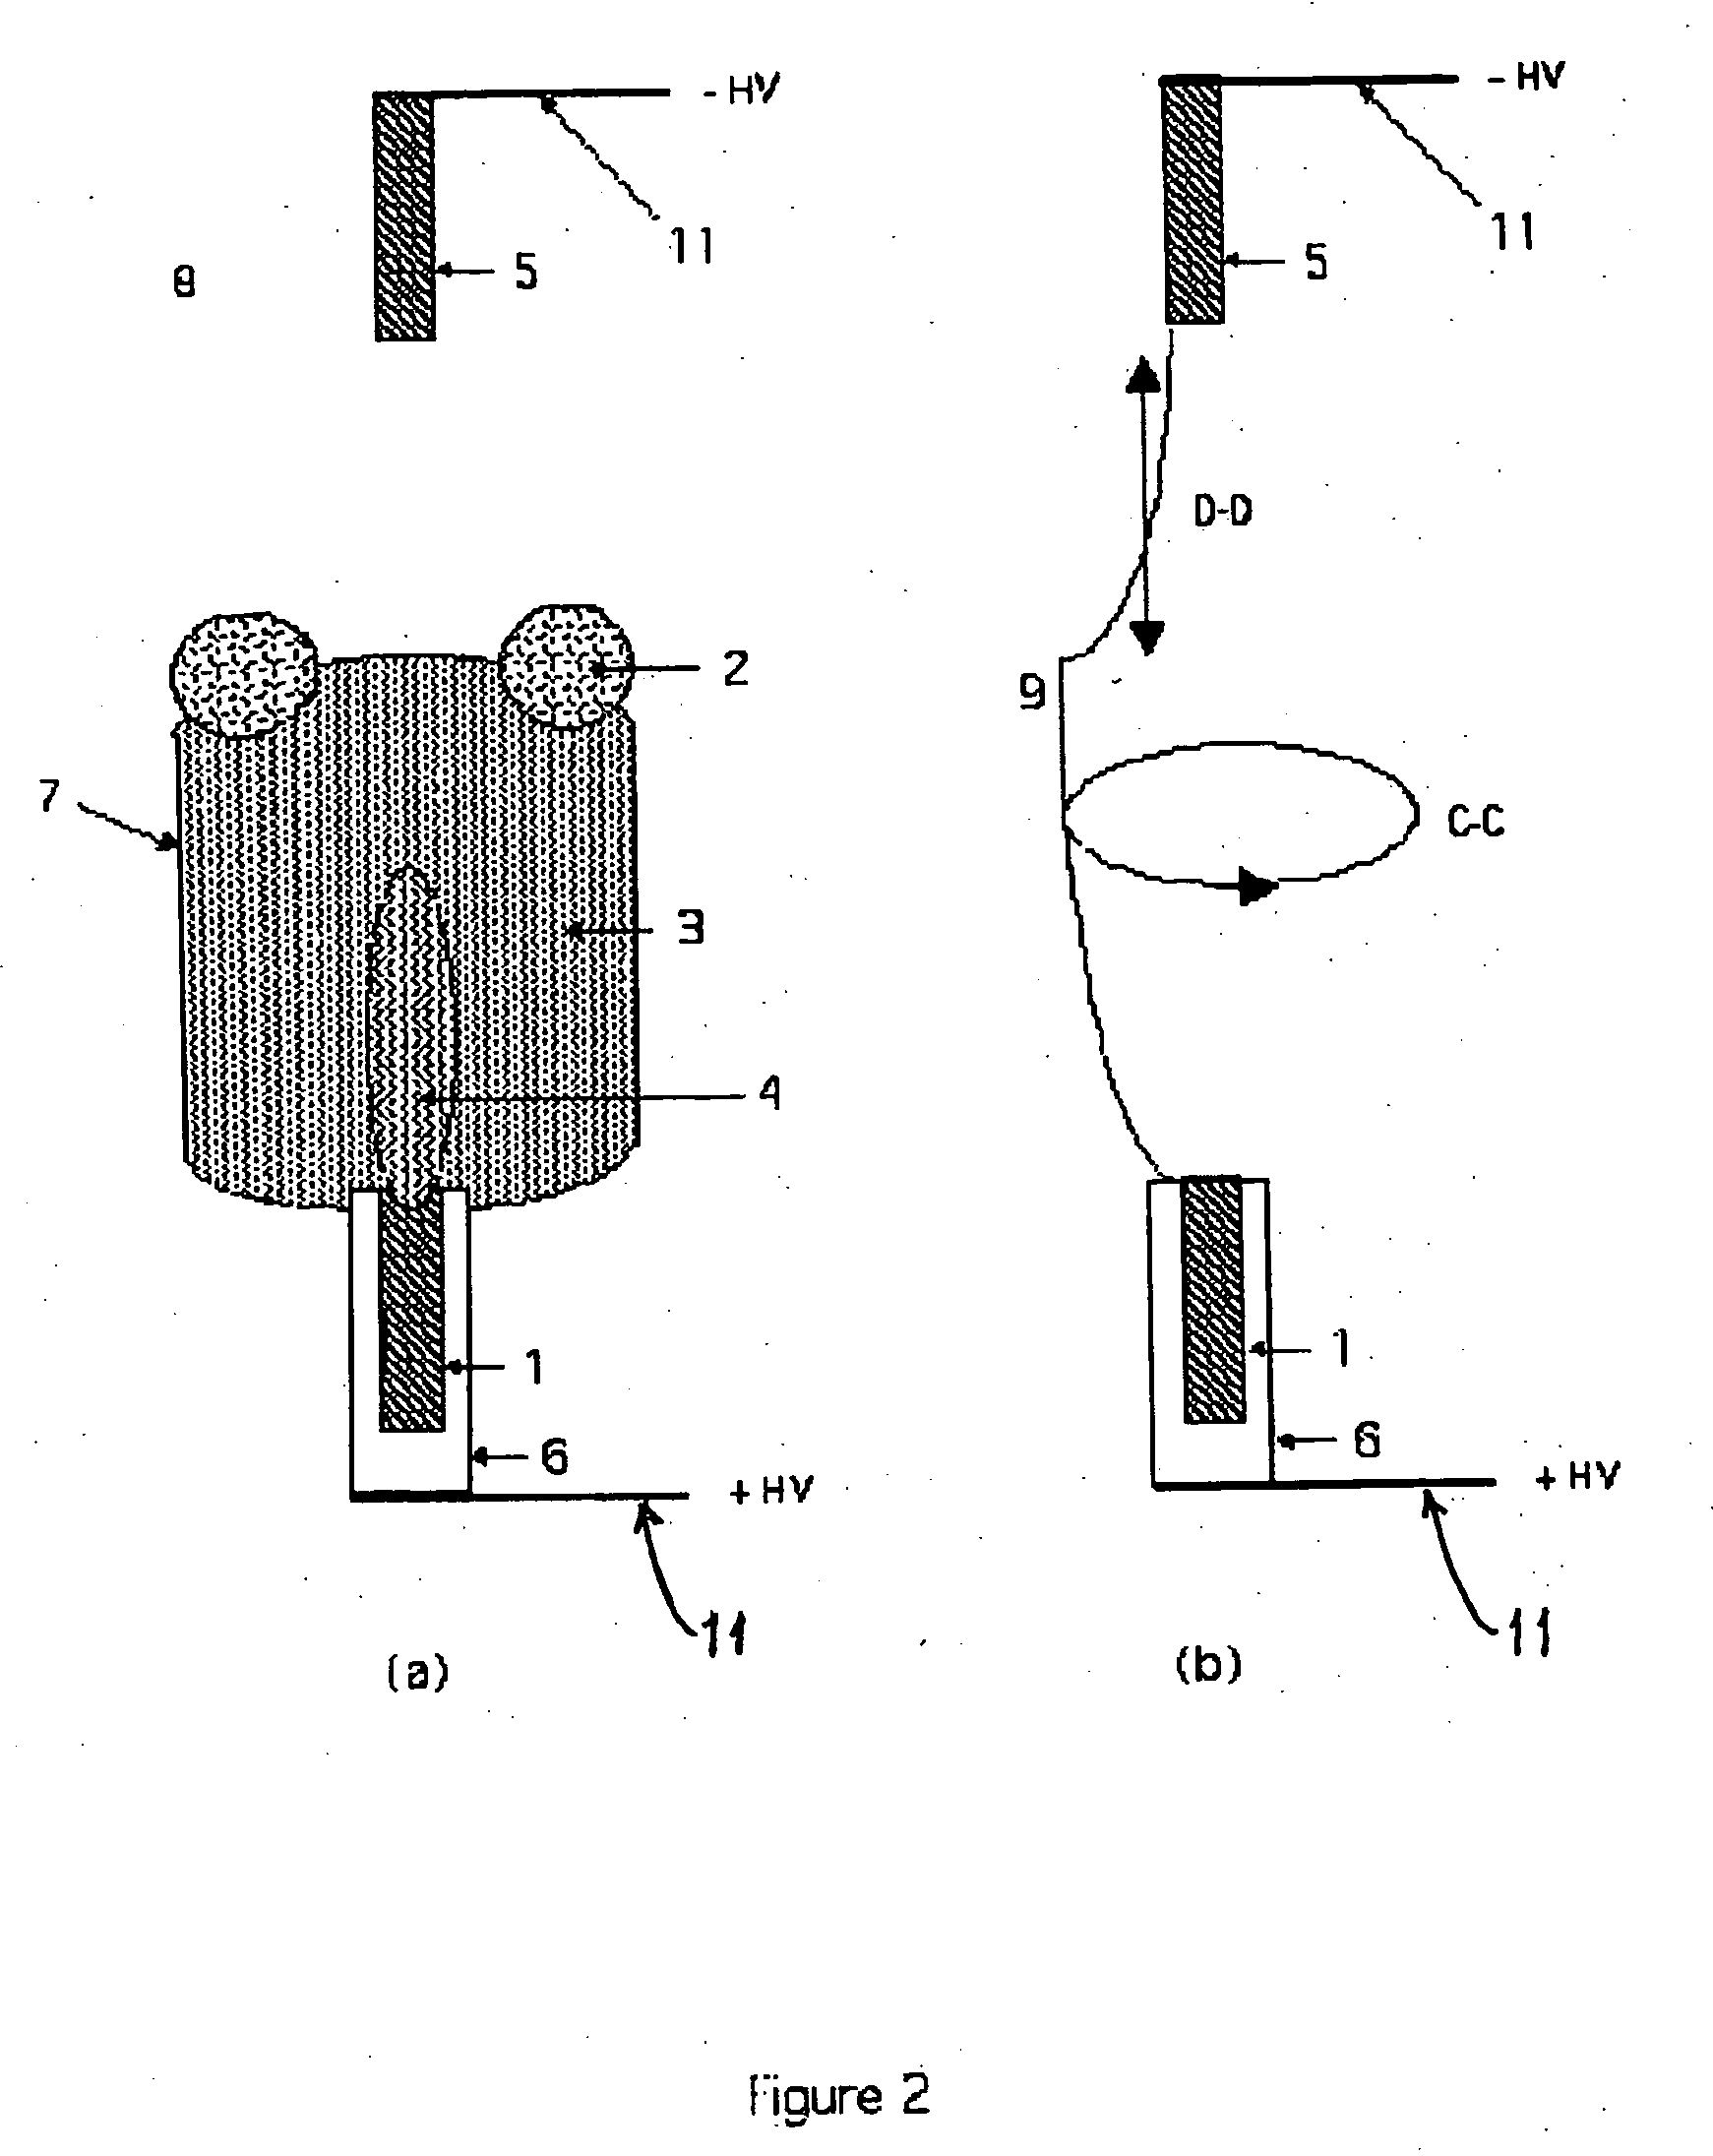 System, method, and apparatus for an intense ultraviolet radiation source